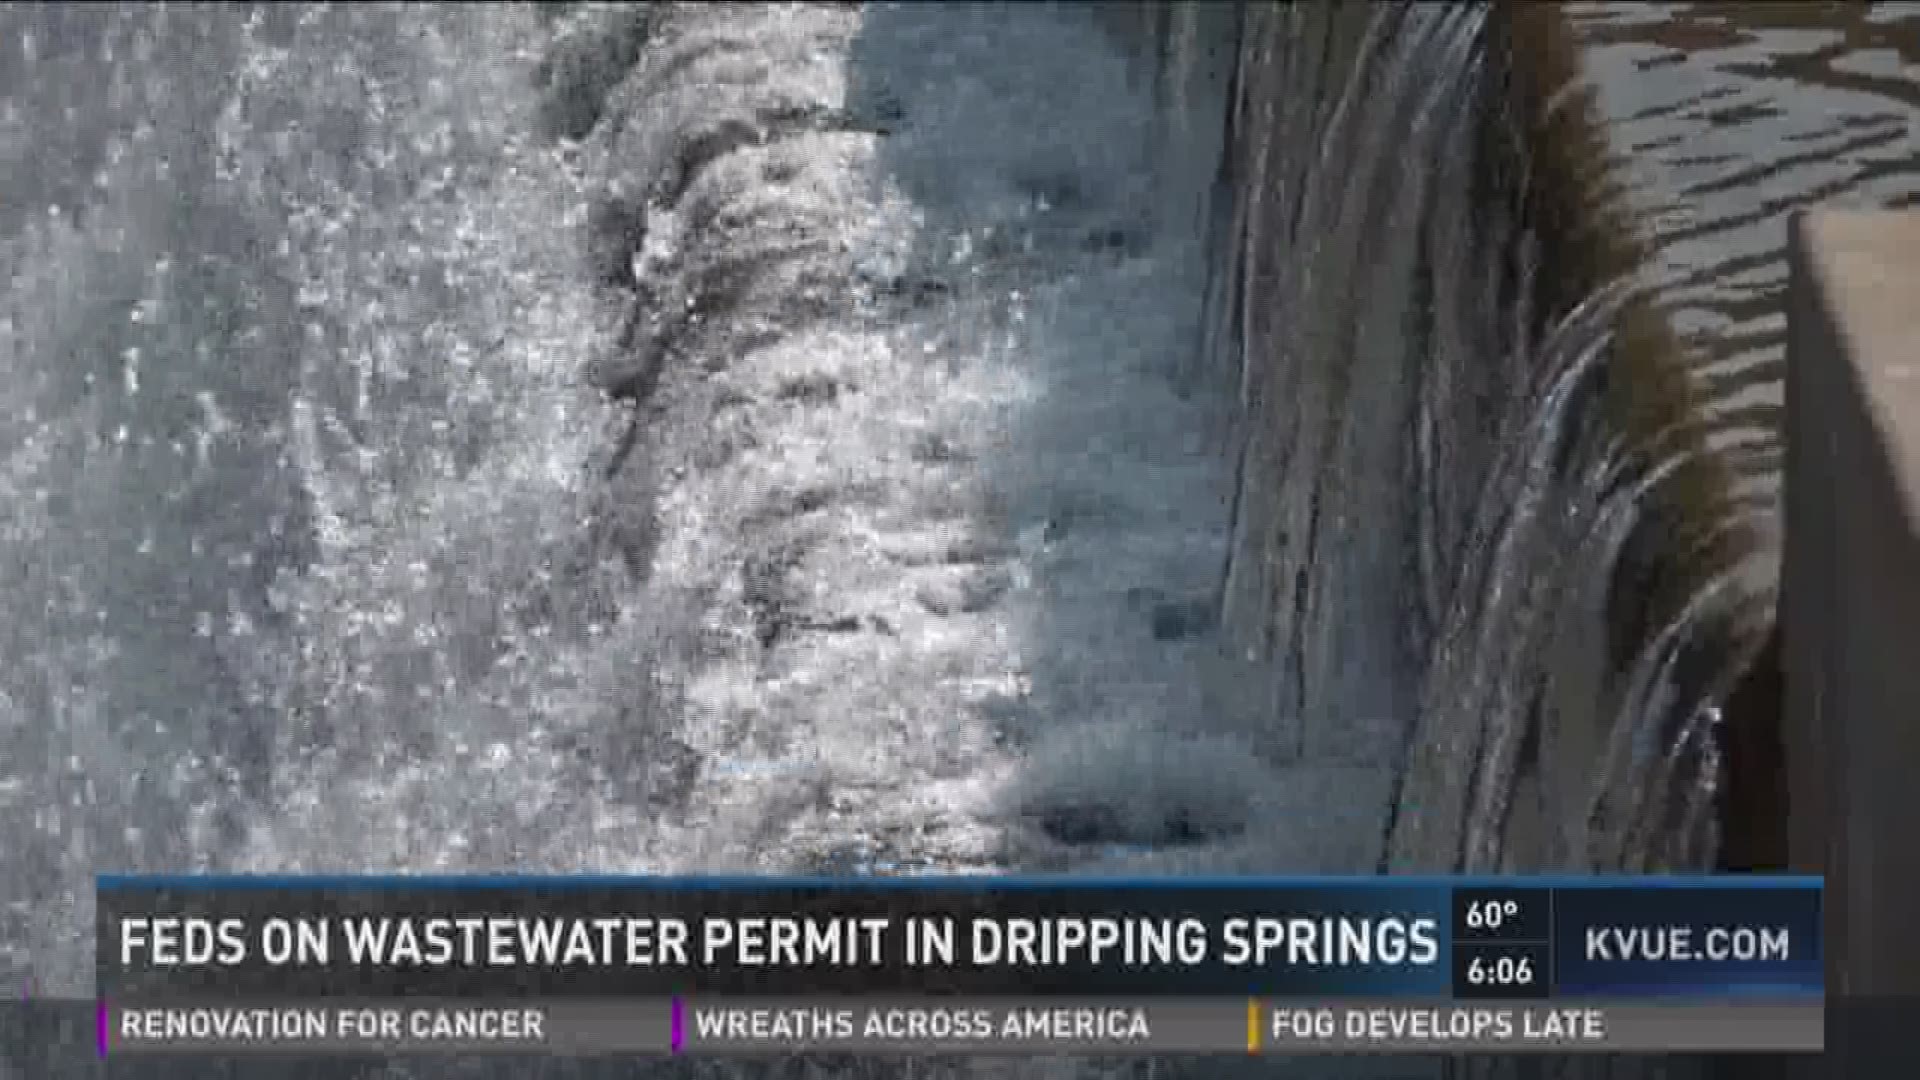 Feds on wastewater permit in Dripping Springs